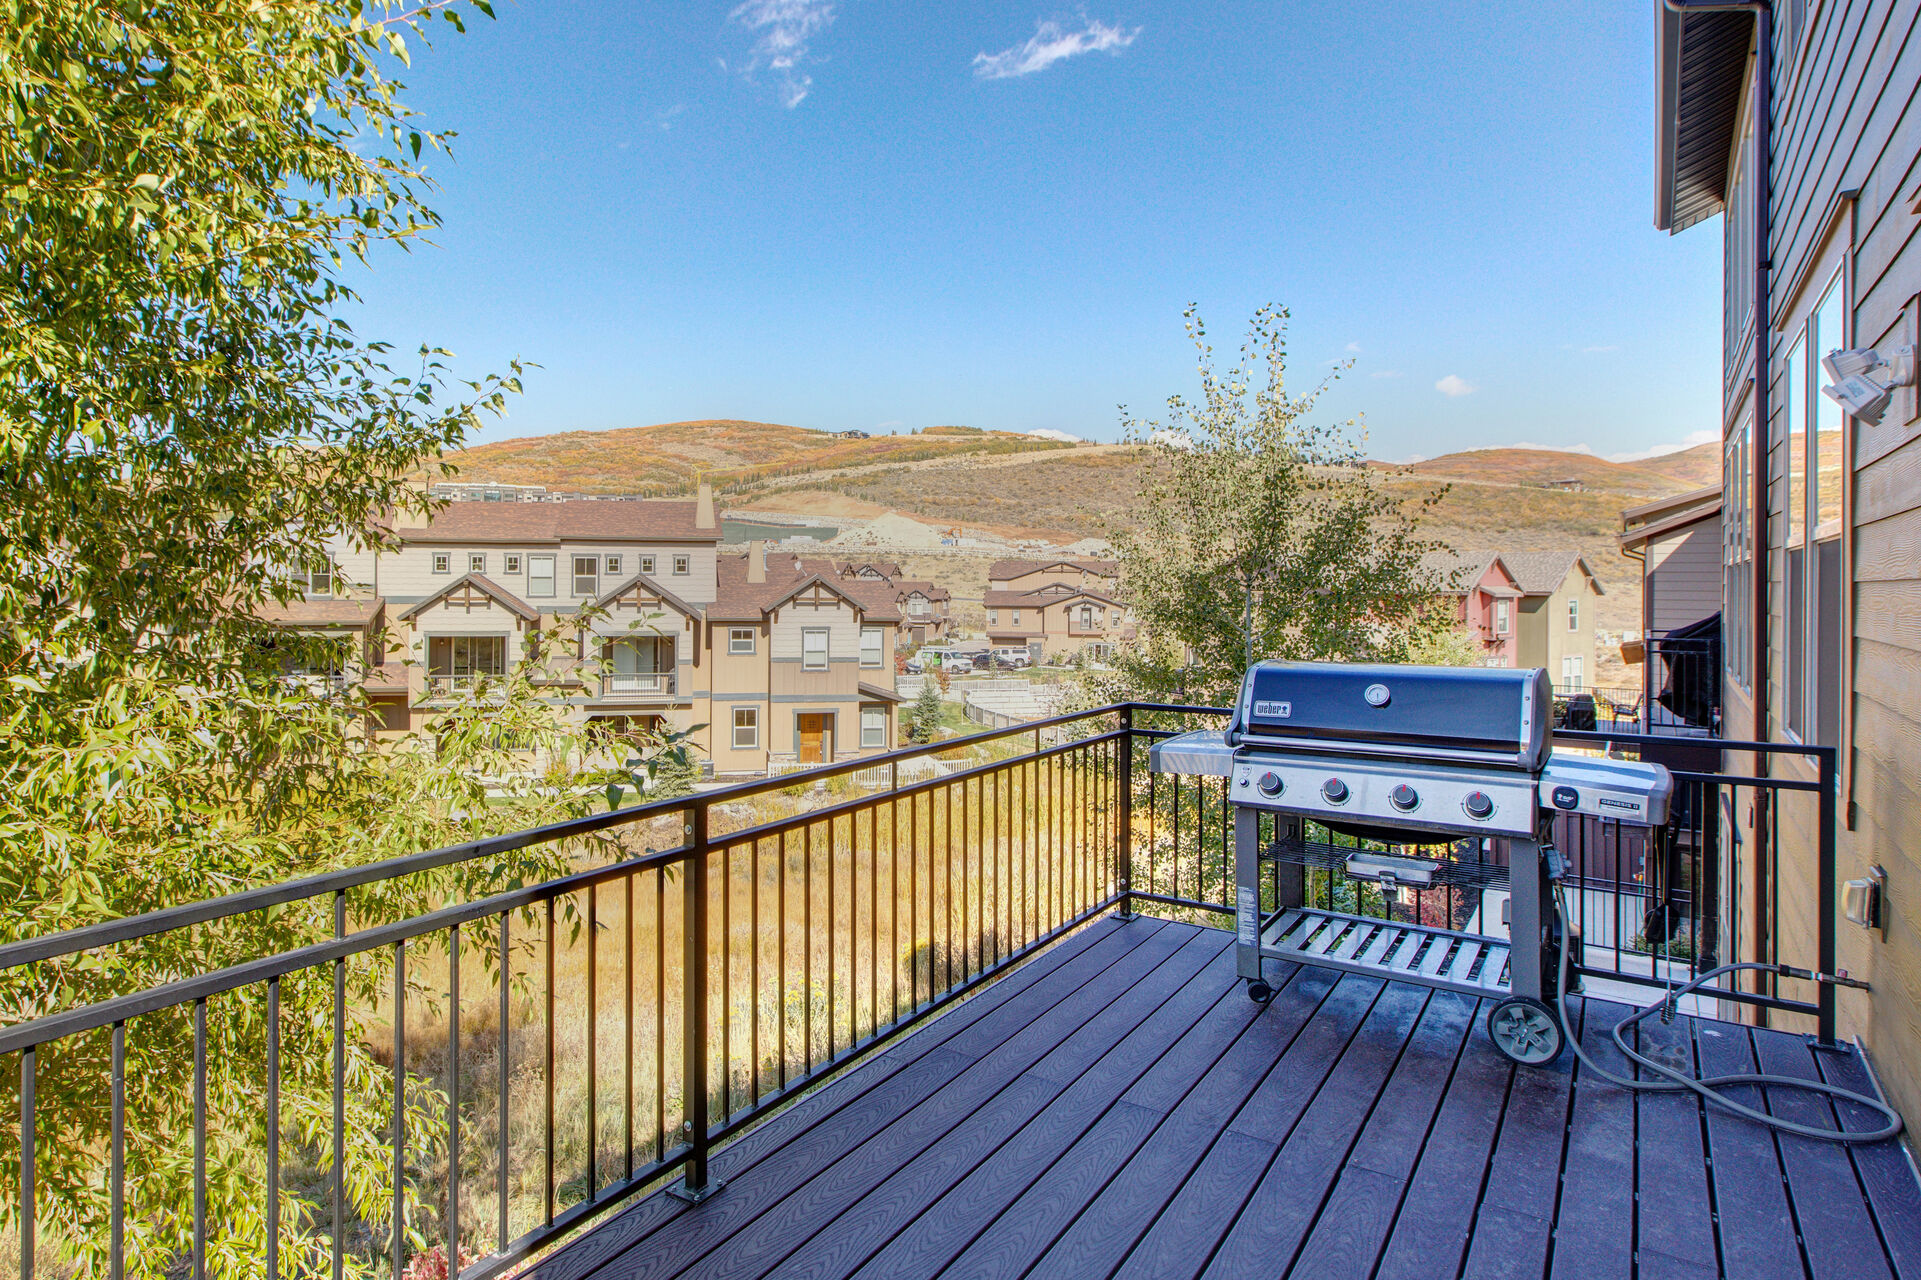 Private deck off main living area with BBQ stove and surrounding views